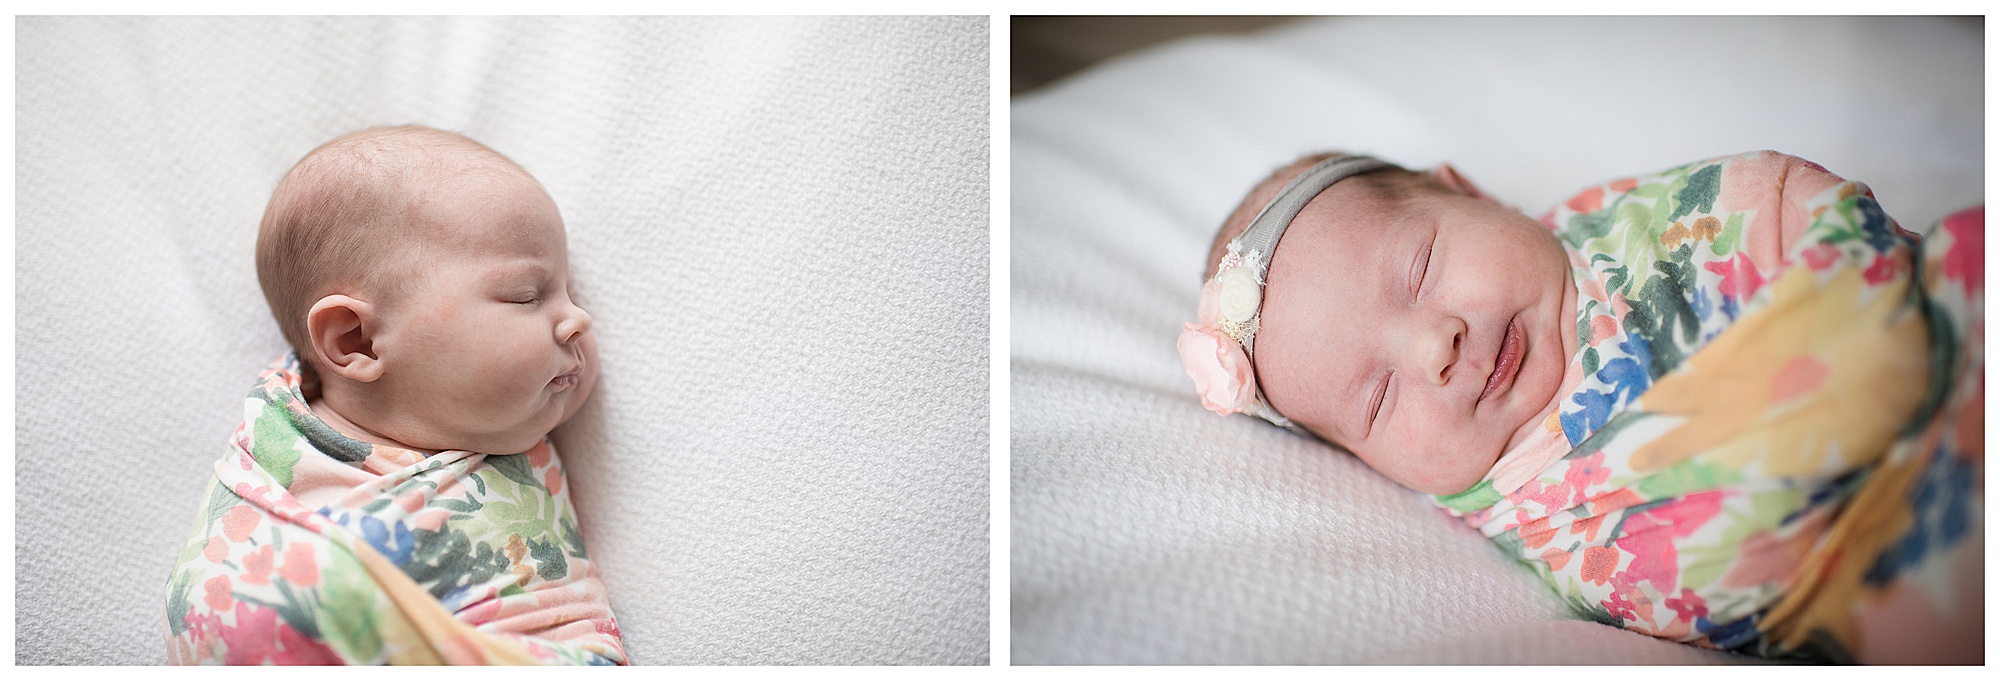 Swaddled newborn baby girl in floral wrap Emily Ann Photography Seattle Photographer